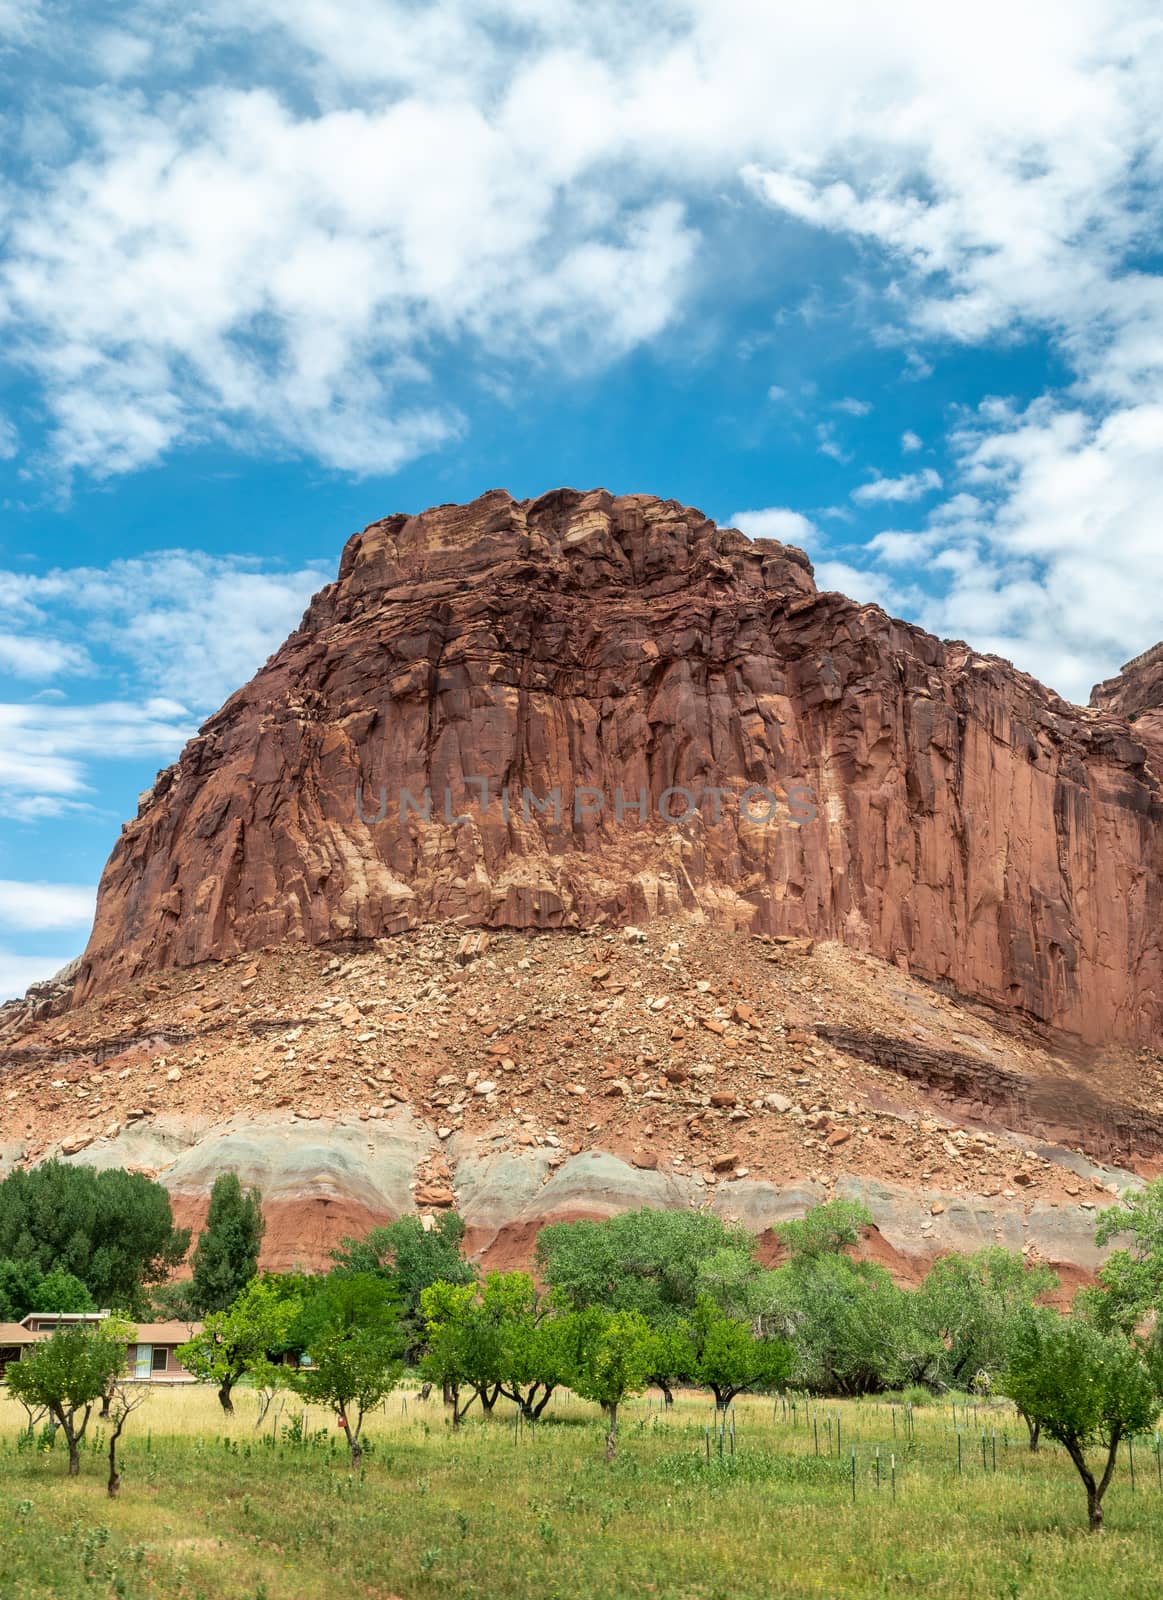 Fruit trees and sandstone formations in Fruita, Capitol Reef National Park, Utah by Njean